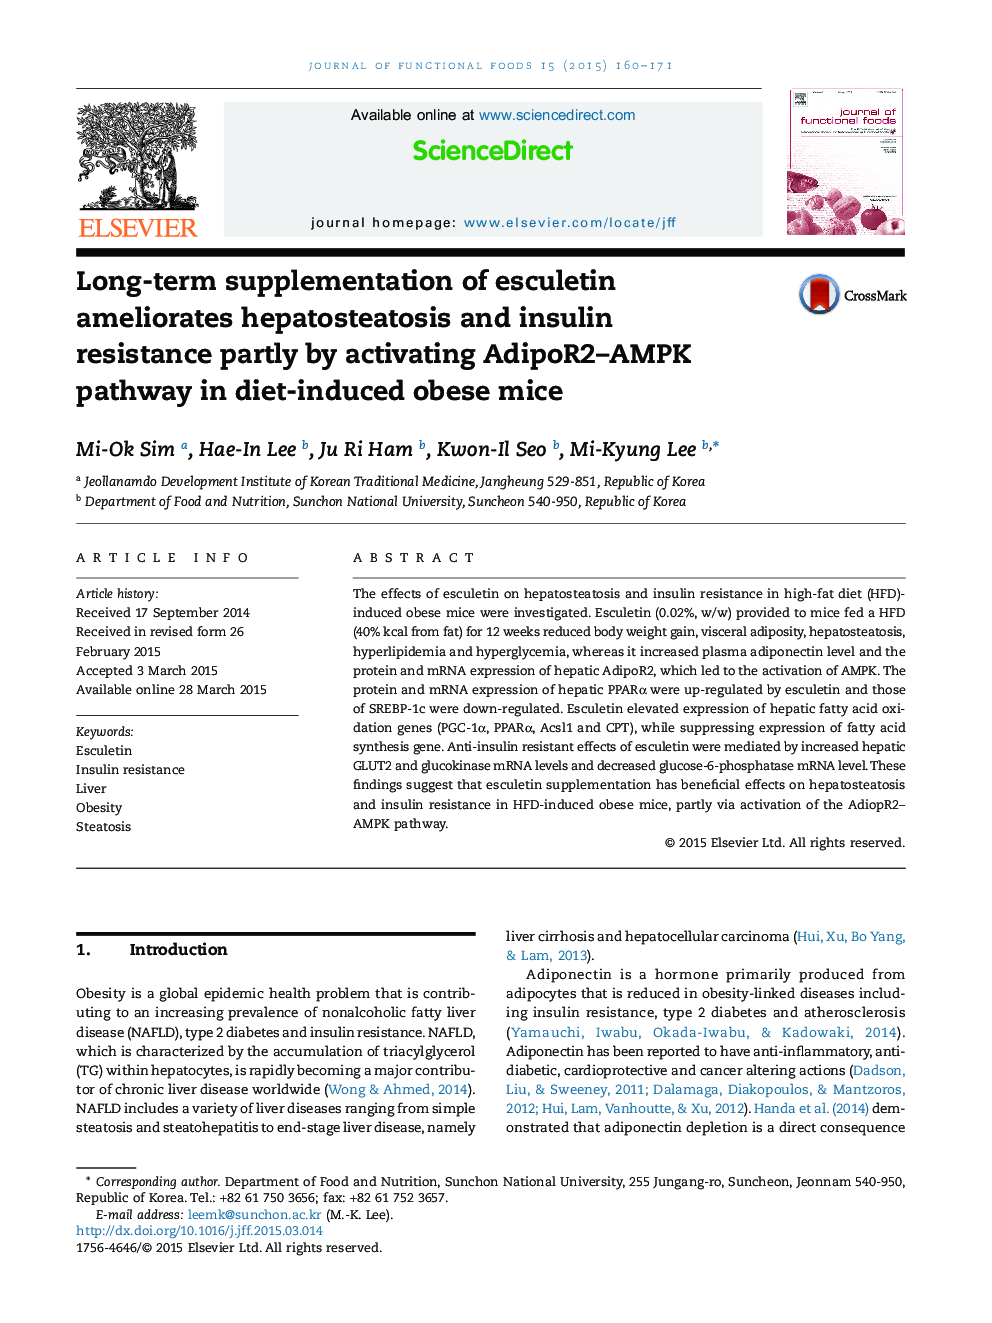 Long-term supplementation of esculetin ameliorates hepatosteatosis and insulin resistance partly by activating AdipoR2–AMPK pathway in diet-induced obese mice